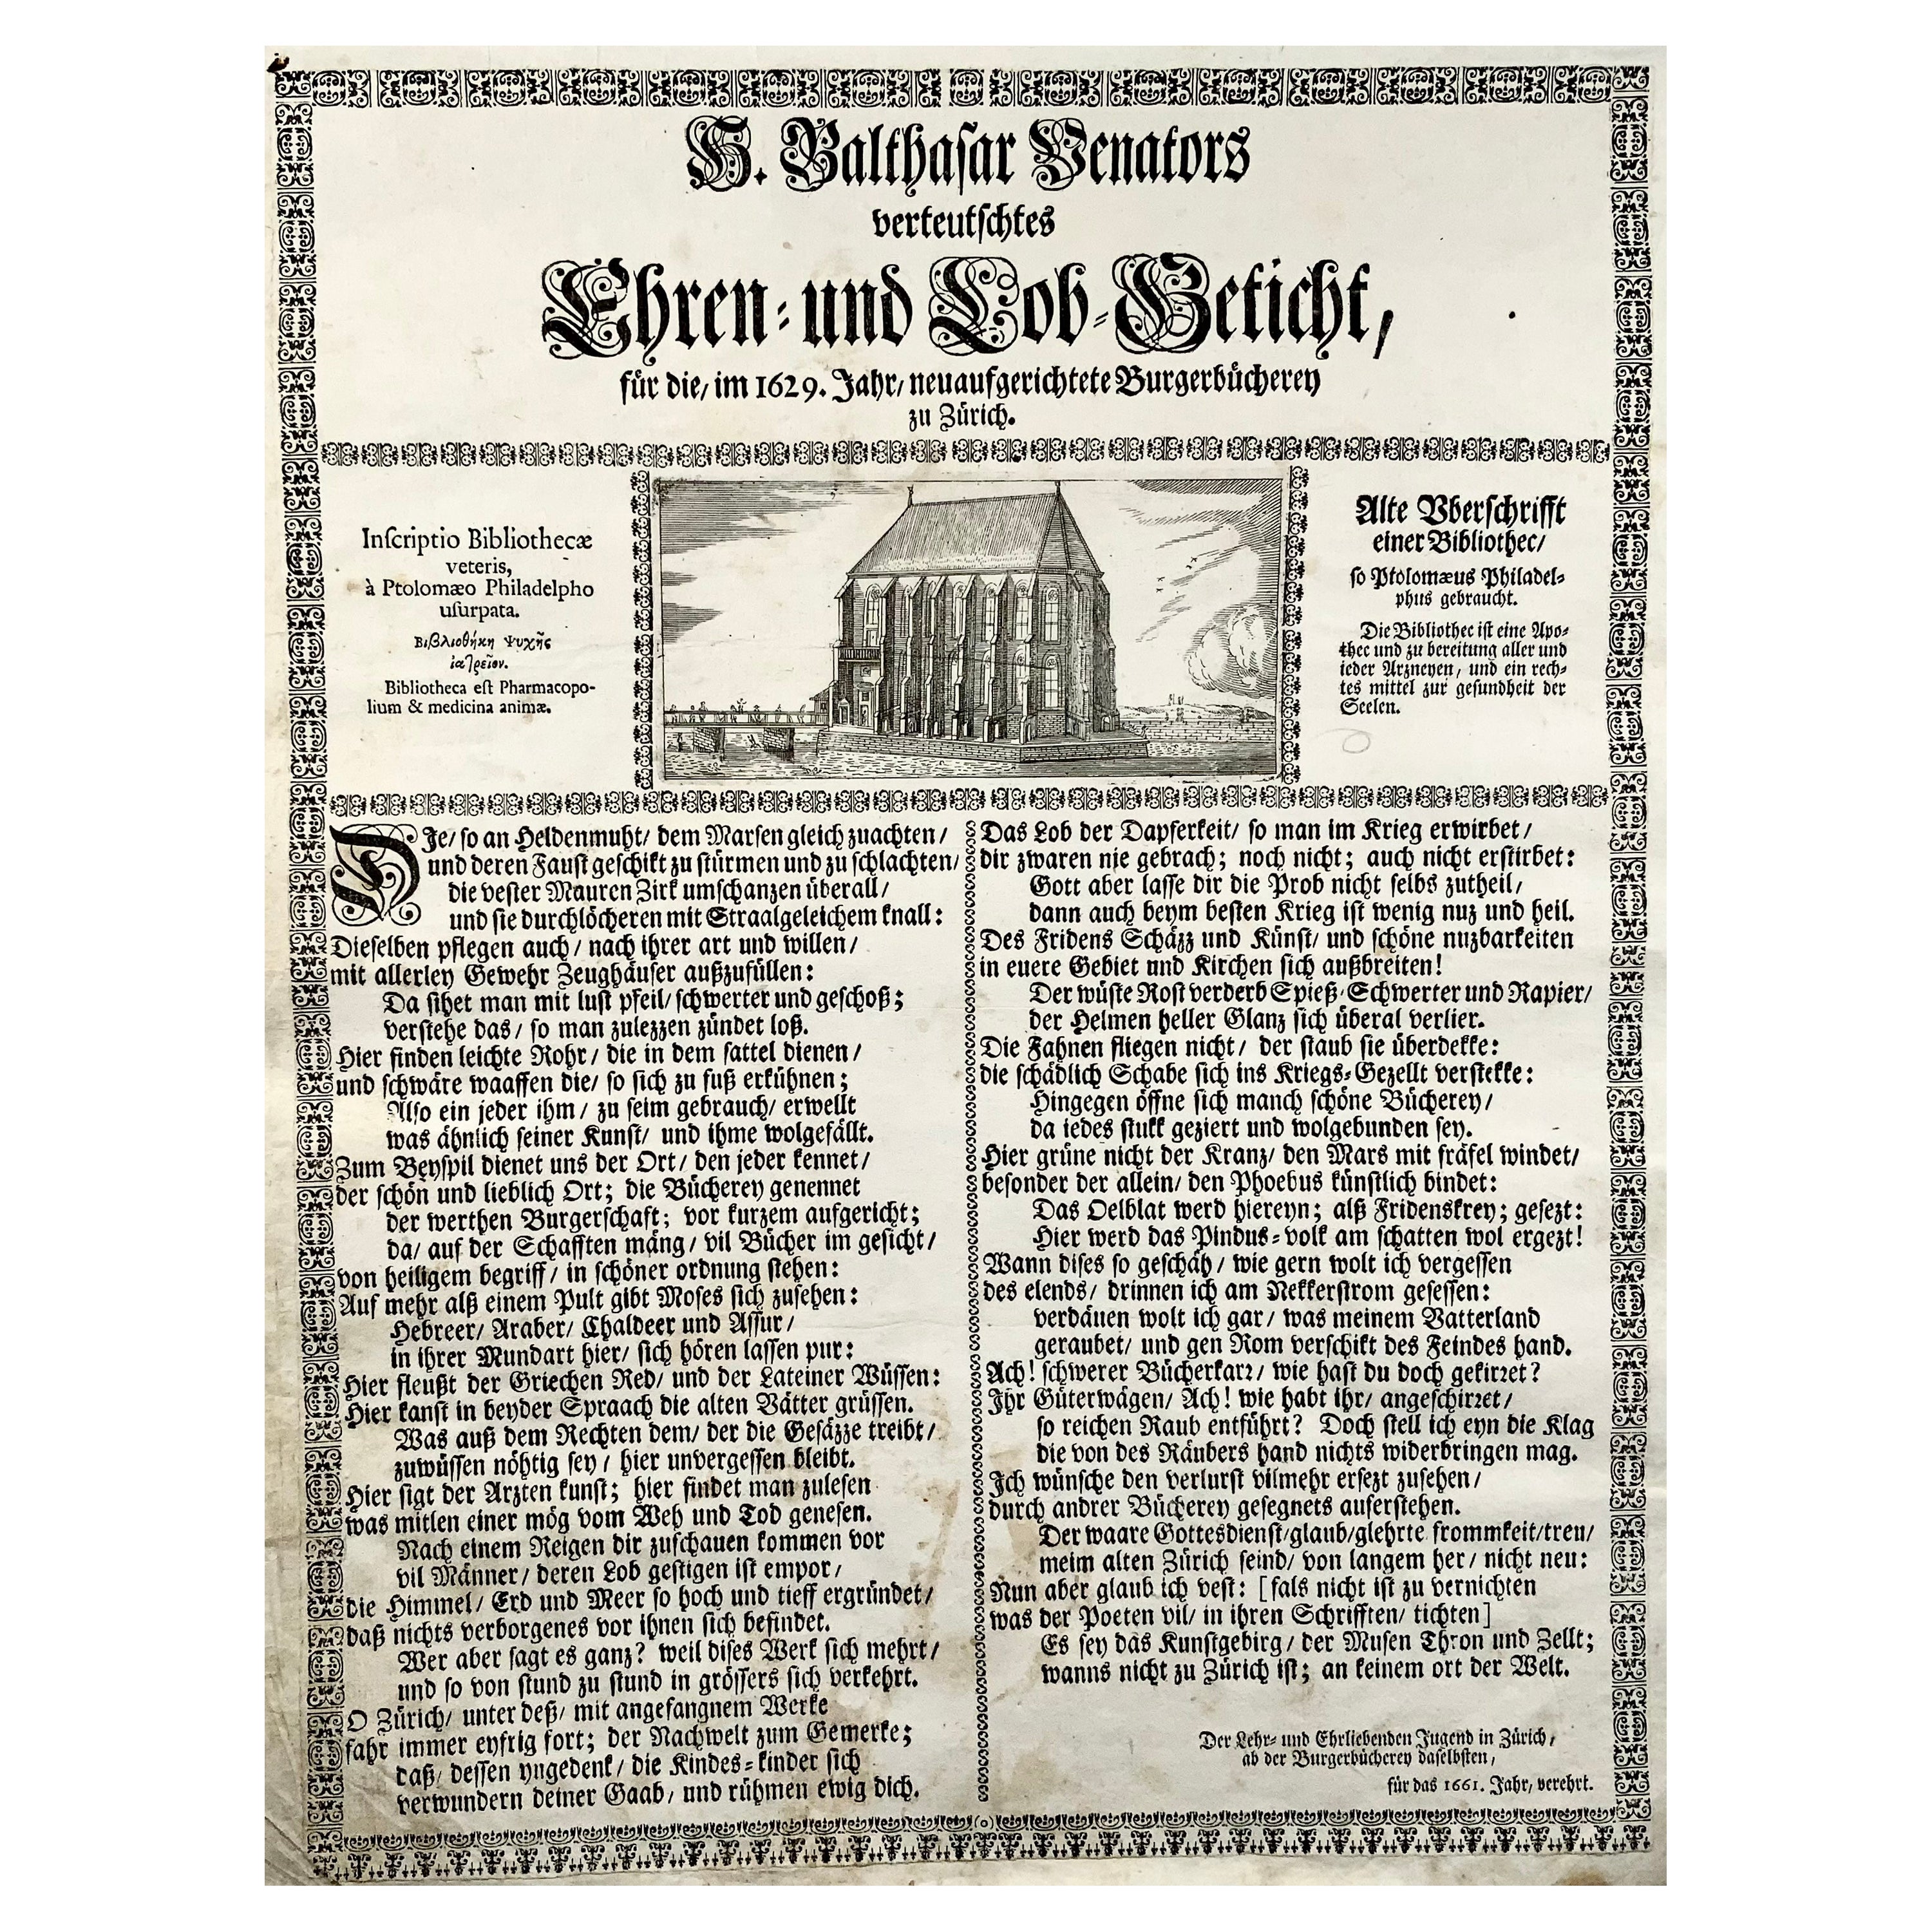 1661 Broadsheet, Ode to the City Library, Zurich, Switzerland, Bibliothecography